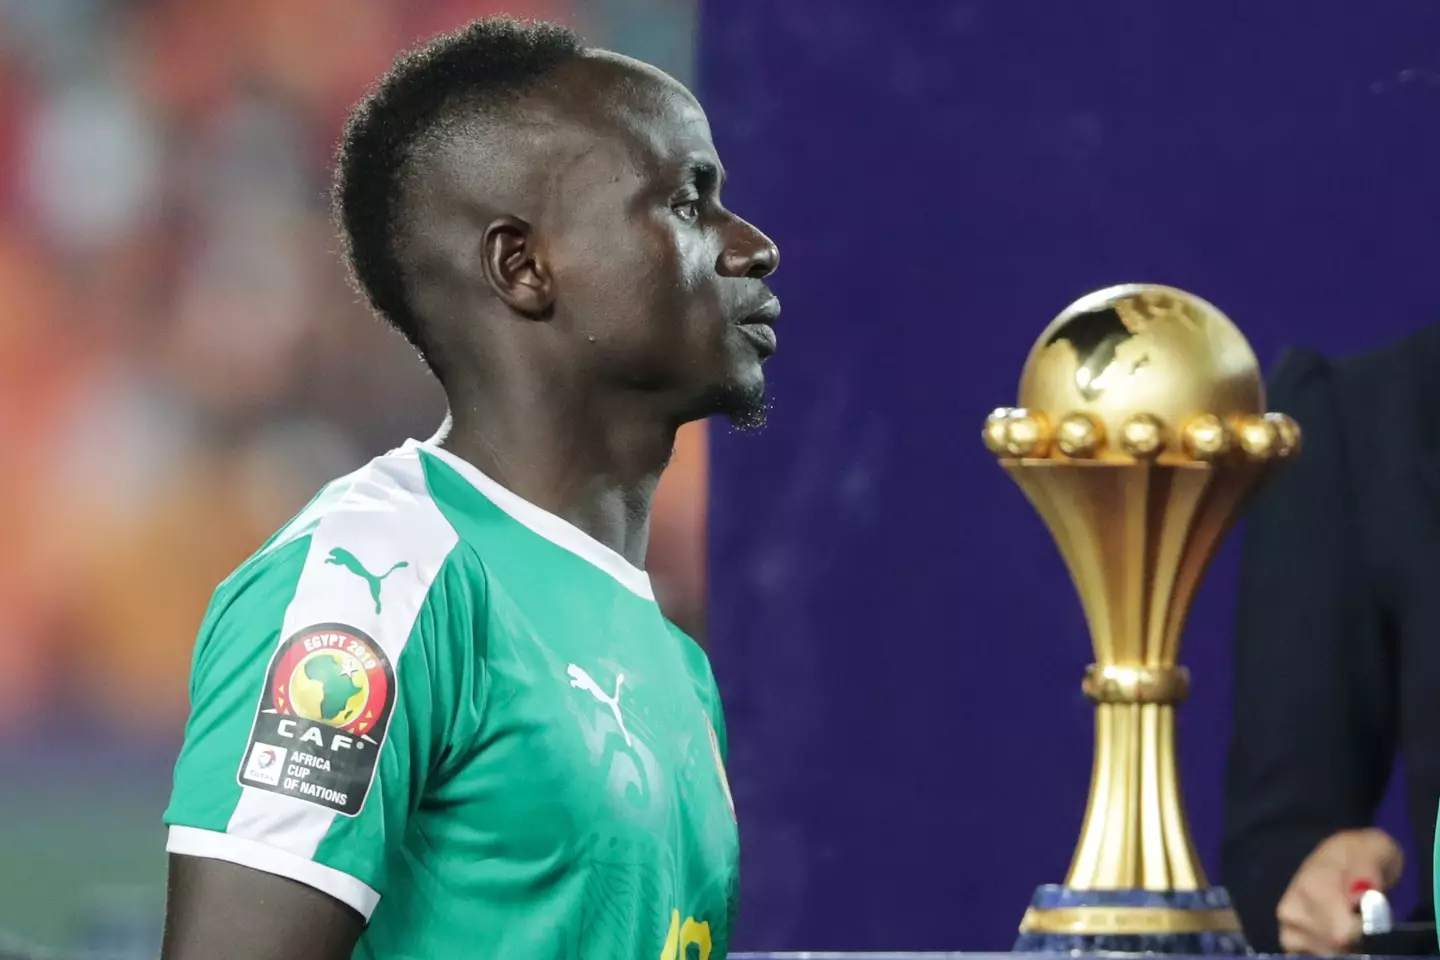 Mane was a runner up at the 2019 edition of the tournament. Image: PA Images